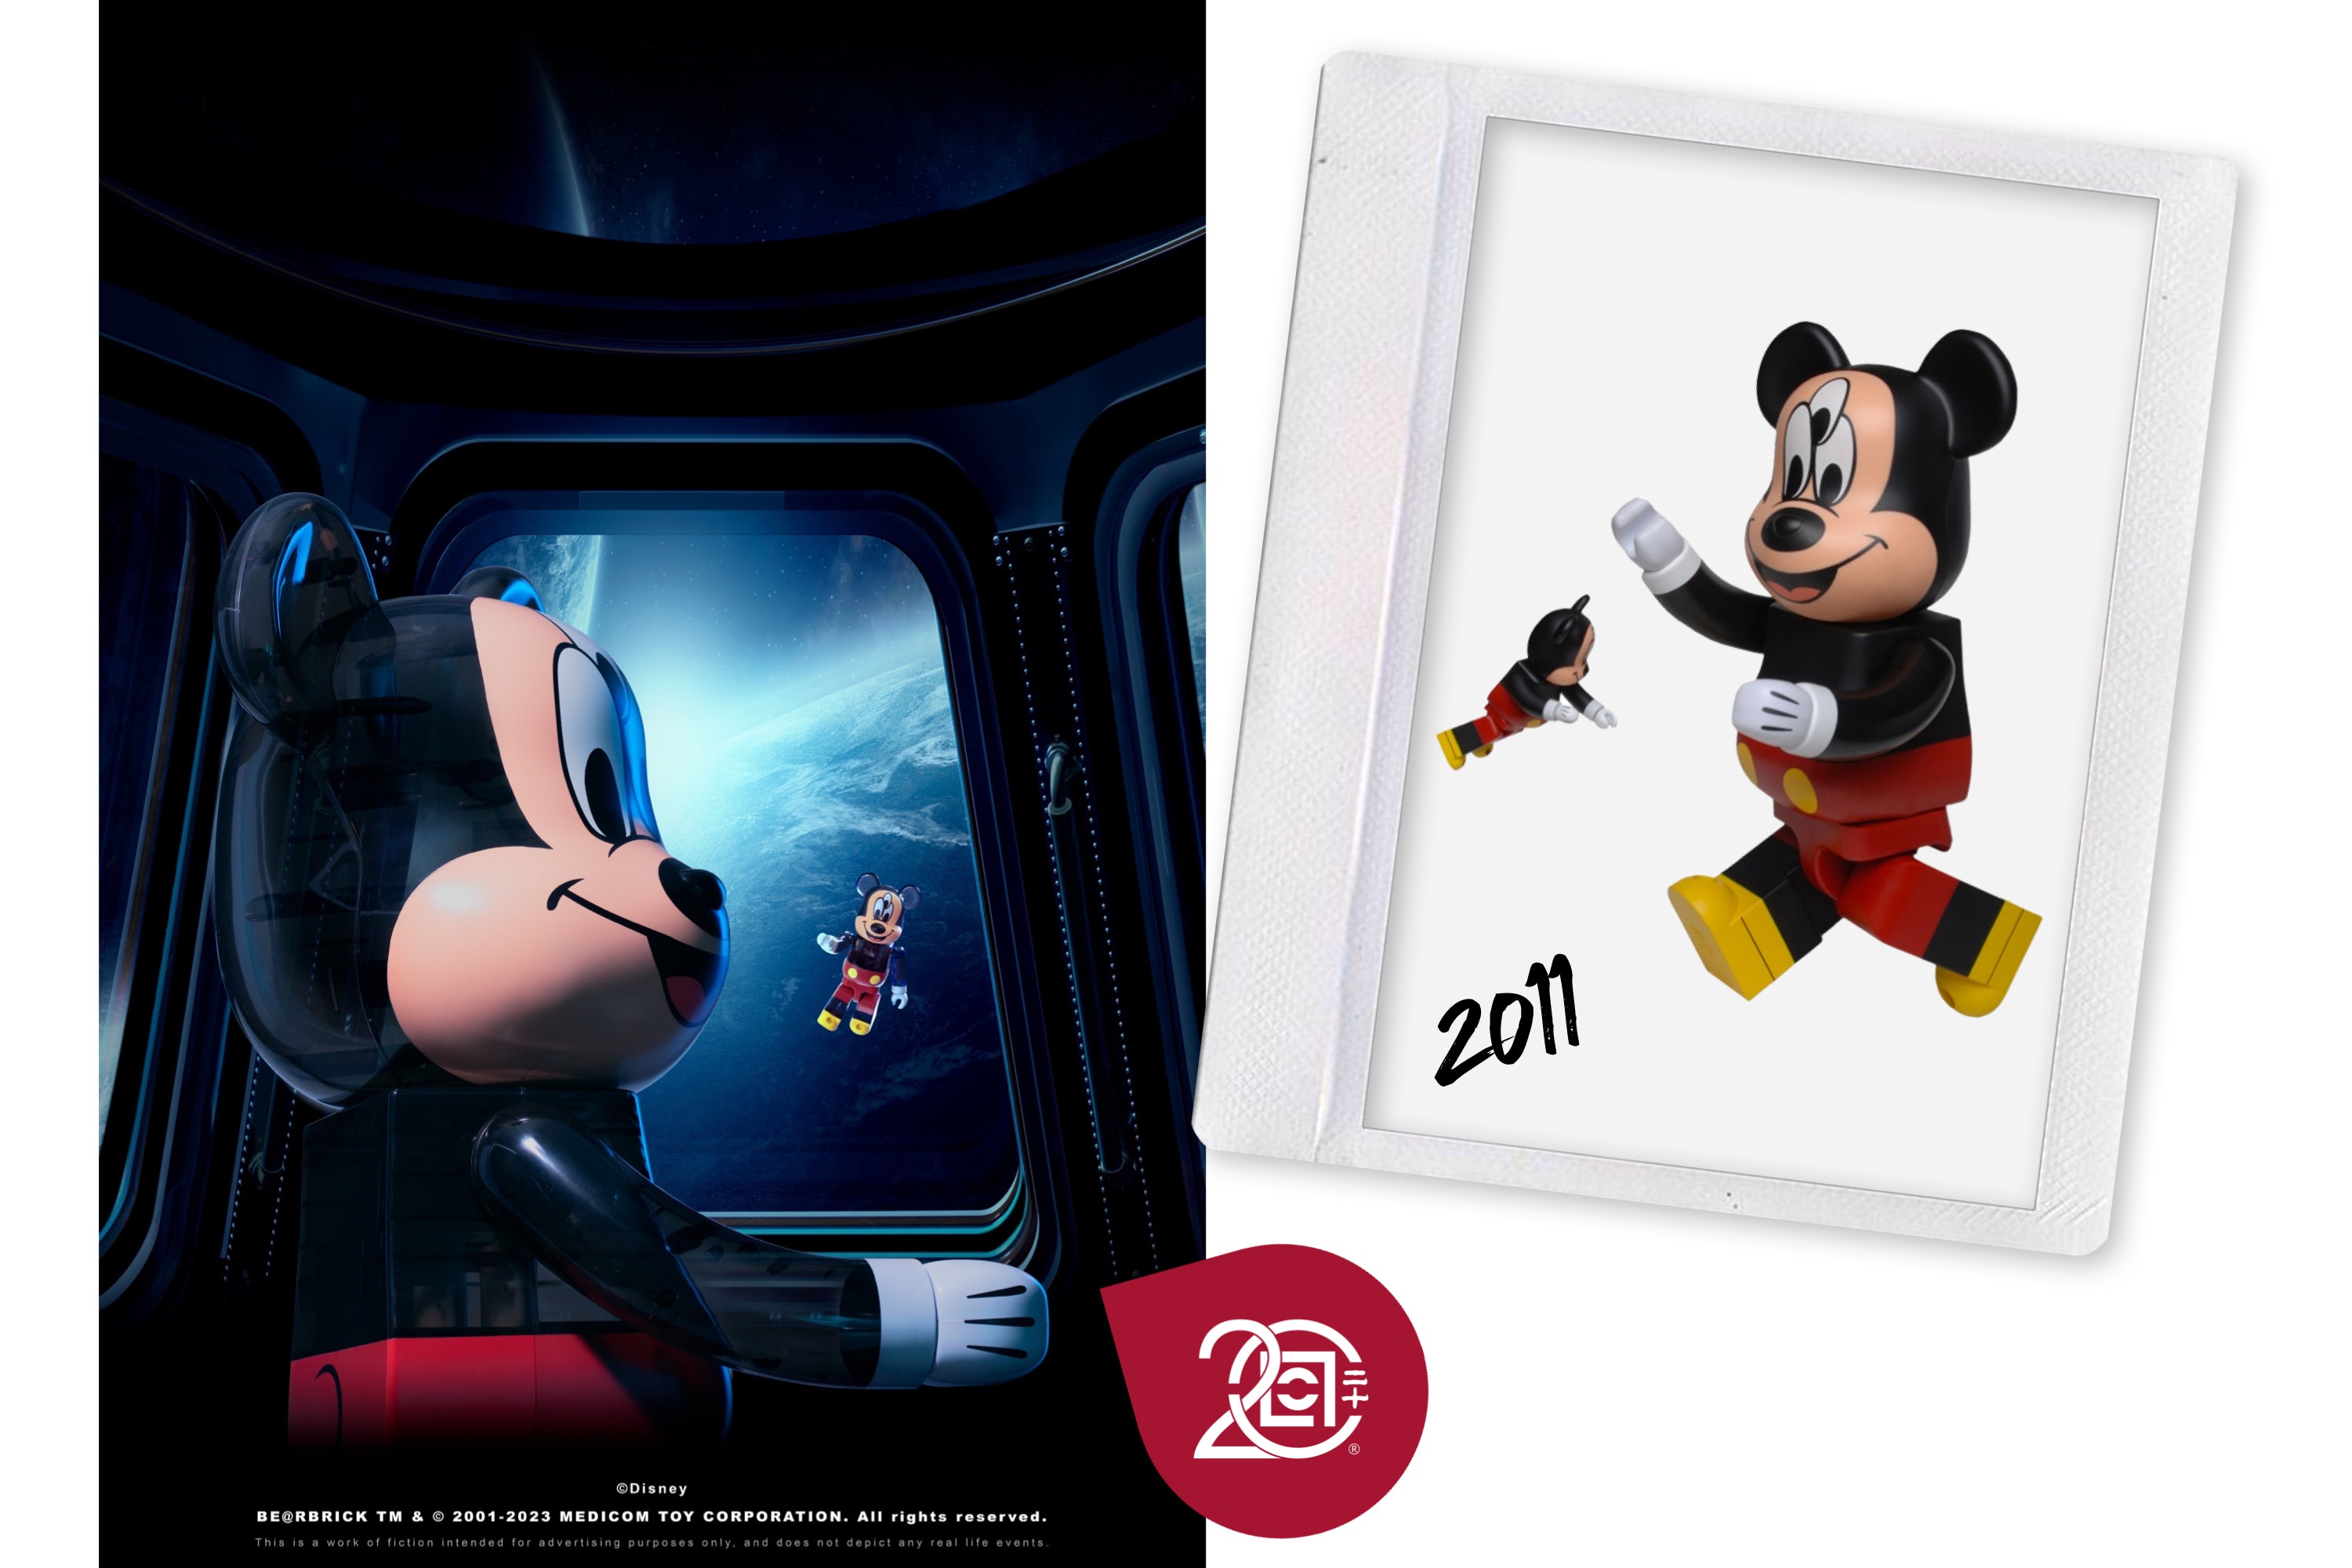 CLOT CELEBRATES 20 YEARS WITH THE BELOVED 3-EYED MICKEY – JUICESTORE